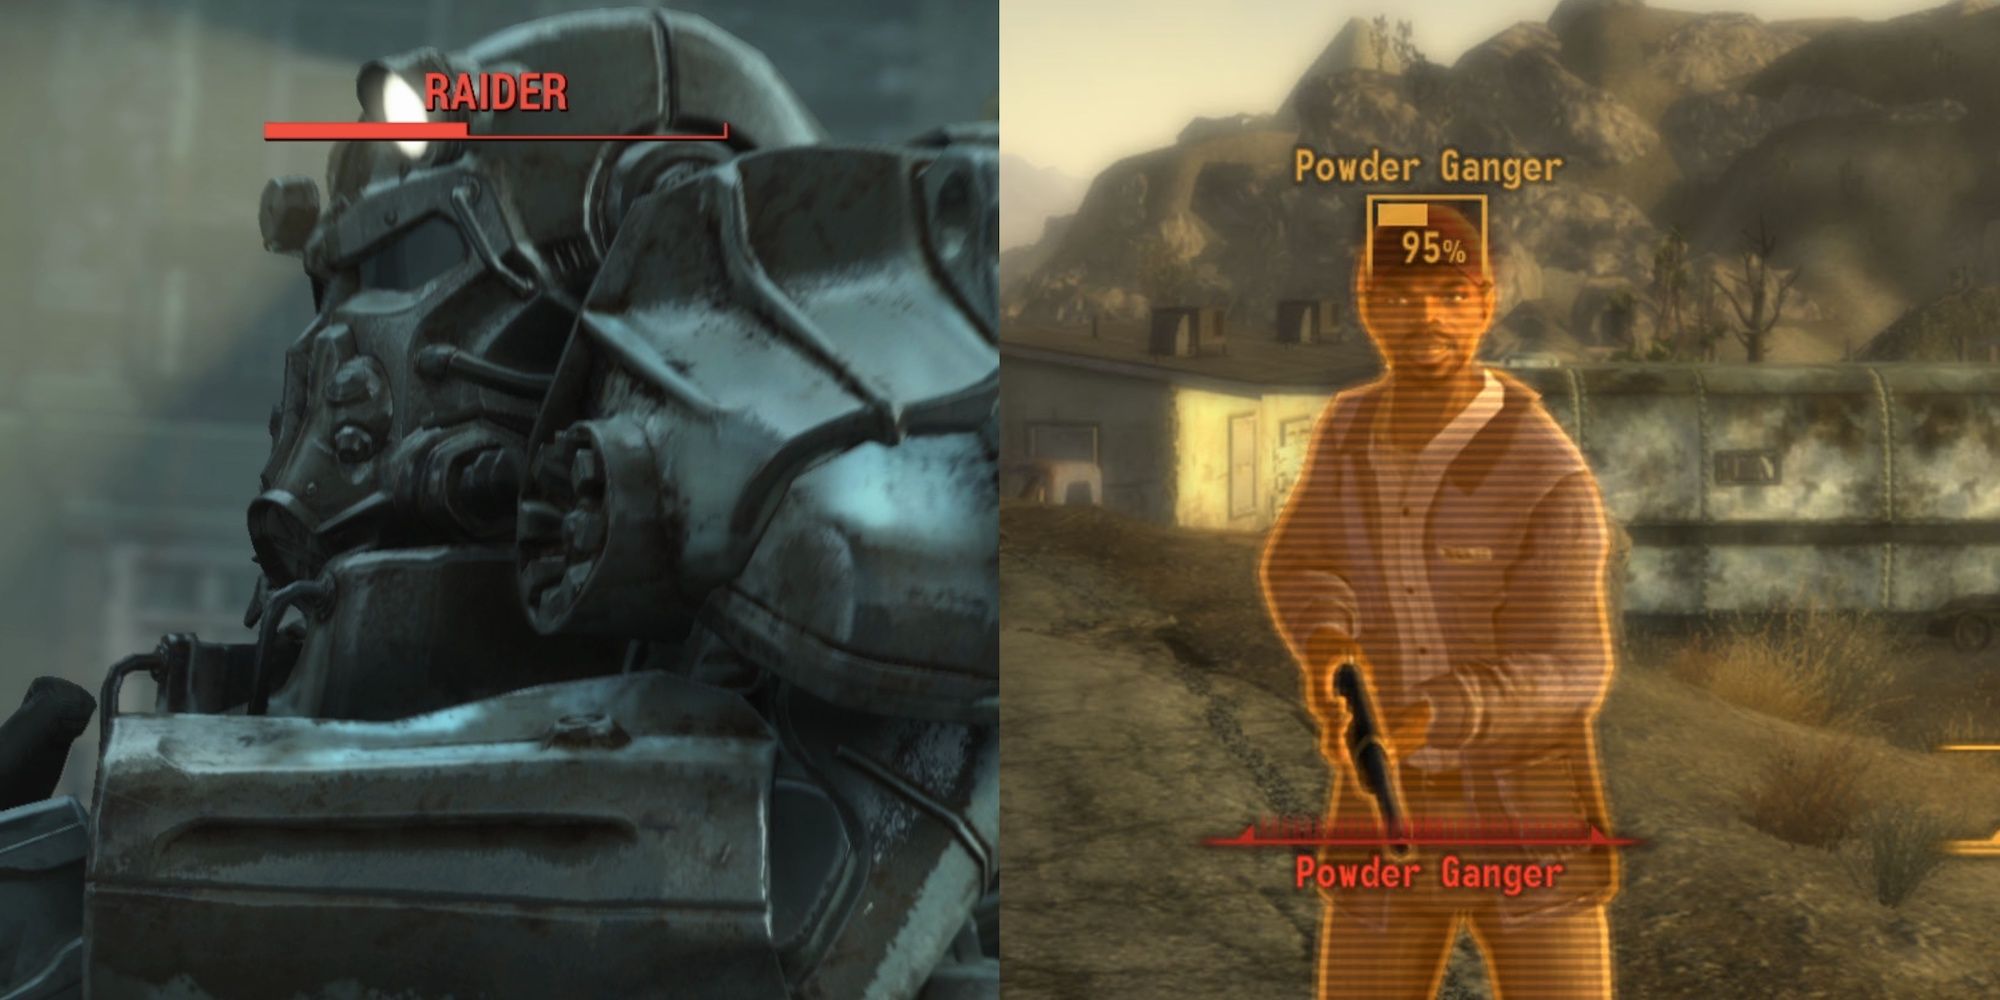 Fallout 4 on the left, New Vegas on the right